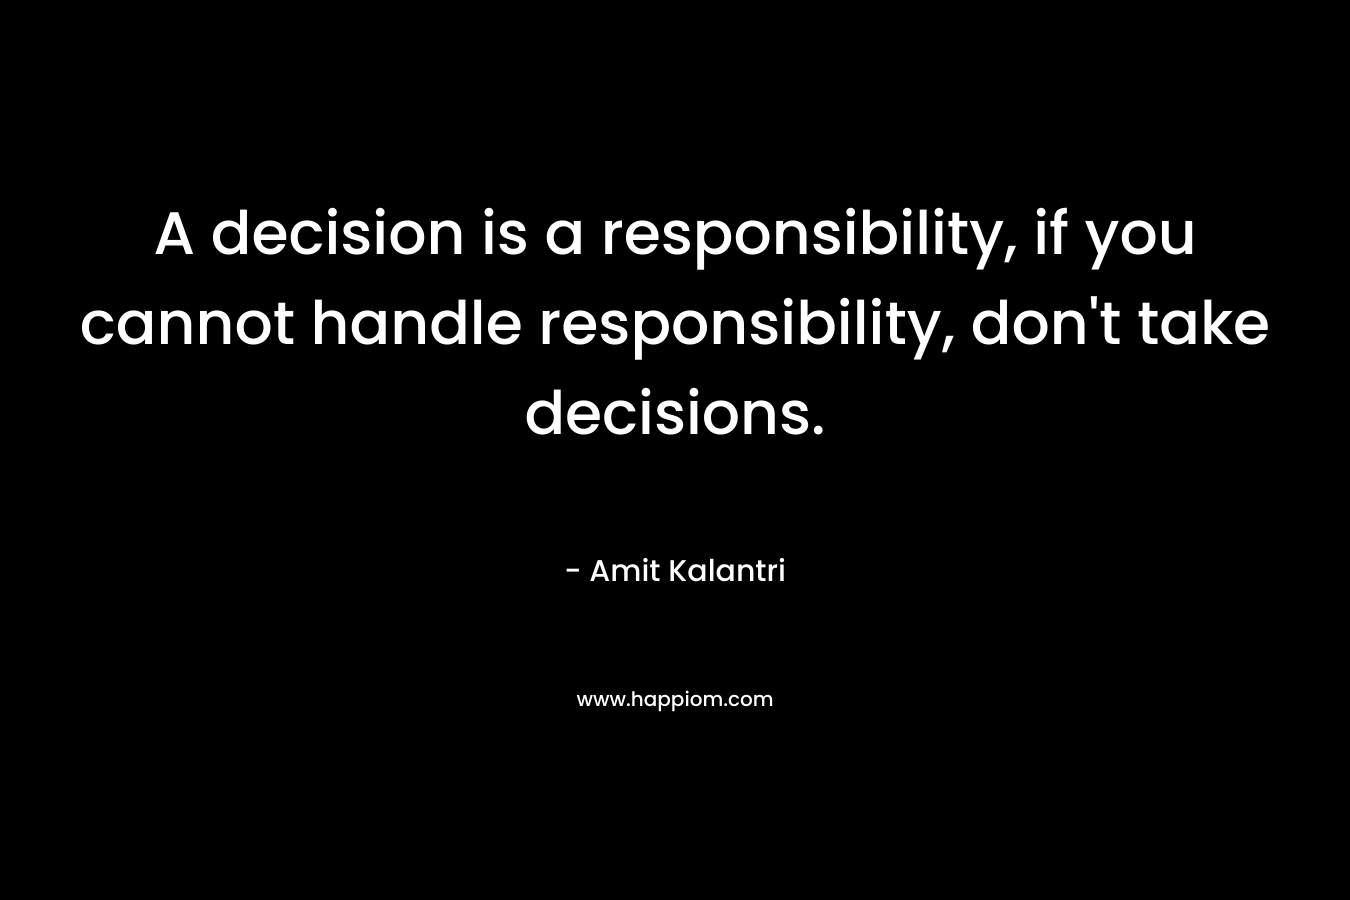 A decision is a responsibility, if you cannot handle responsibility, don’t take decisions. – Amit Kalantri